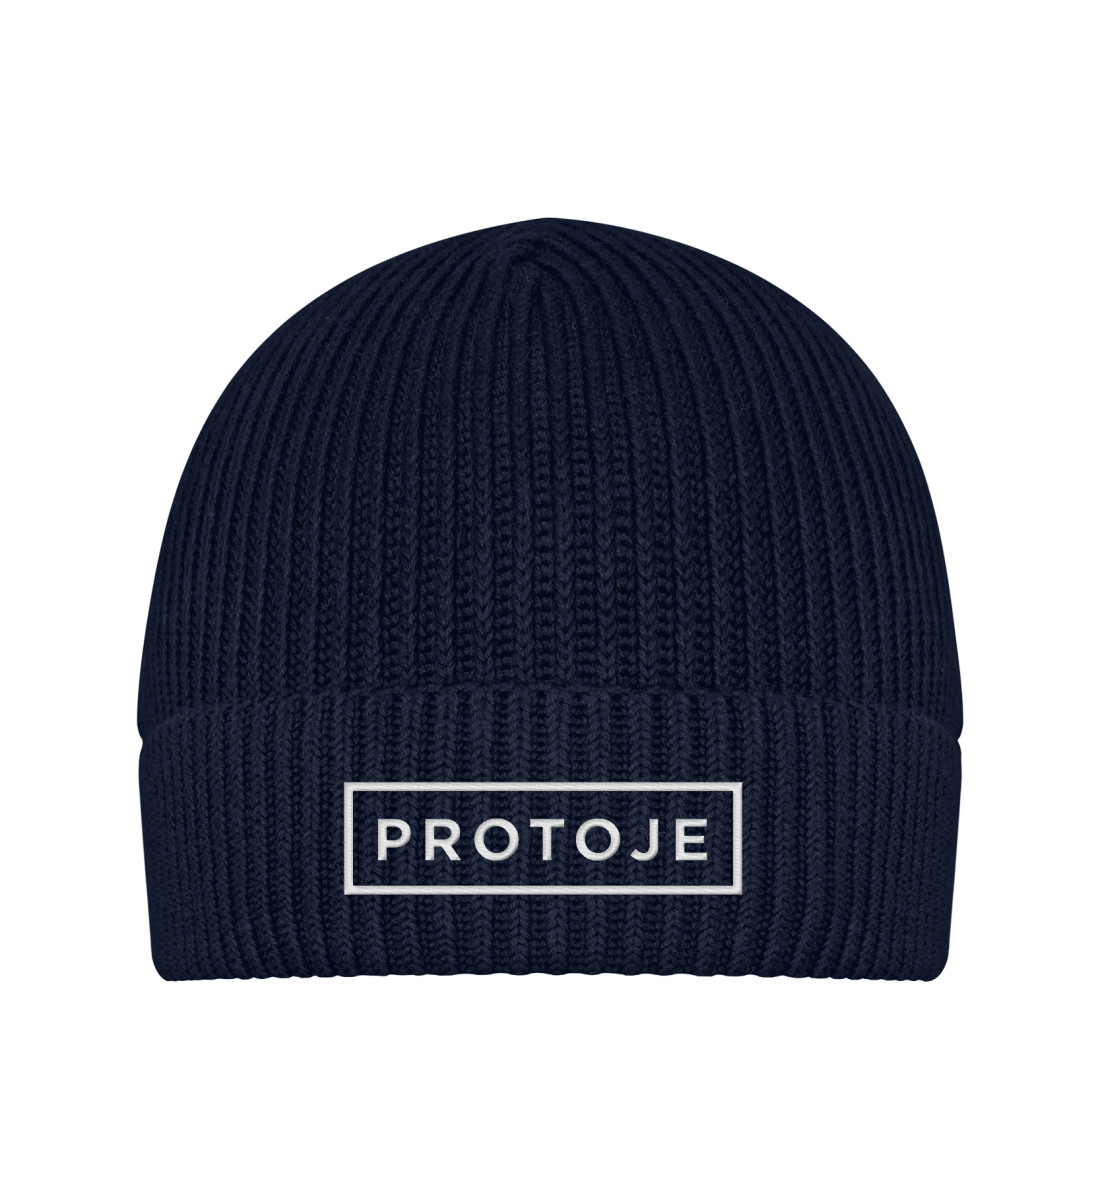 Protoje Reggae Music Beanie - Fisherman's Hat ST/ST with Embroidery-6959